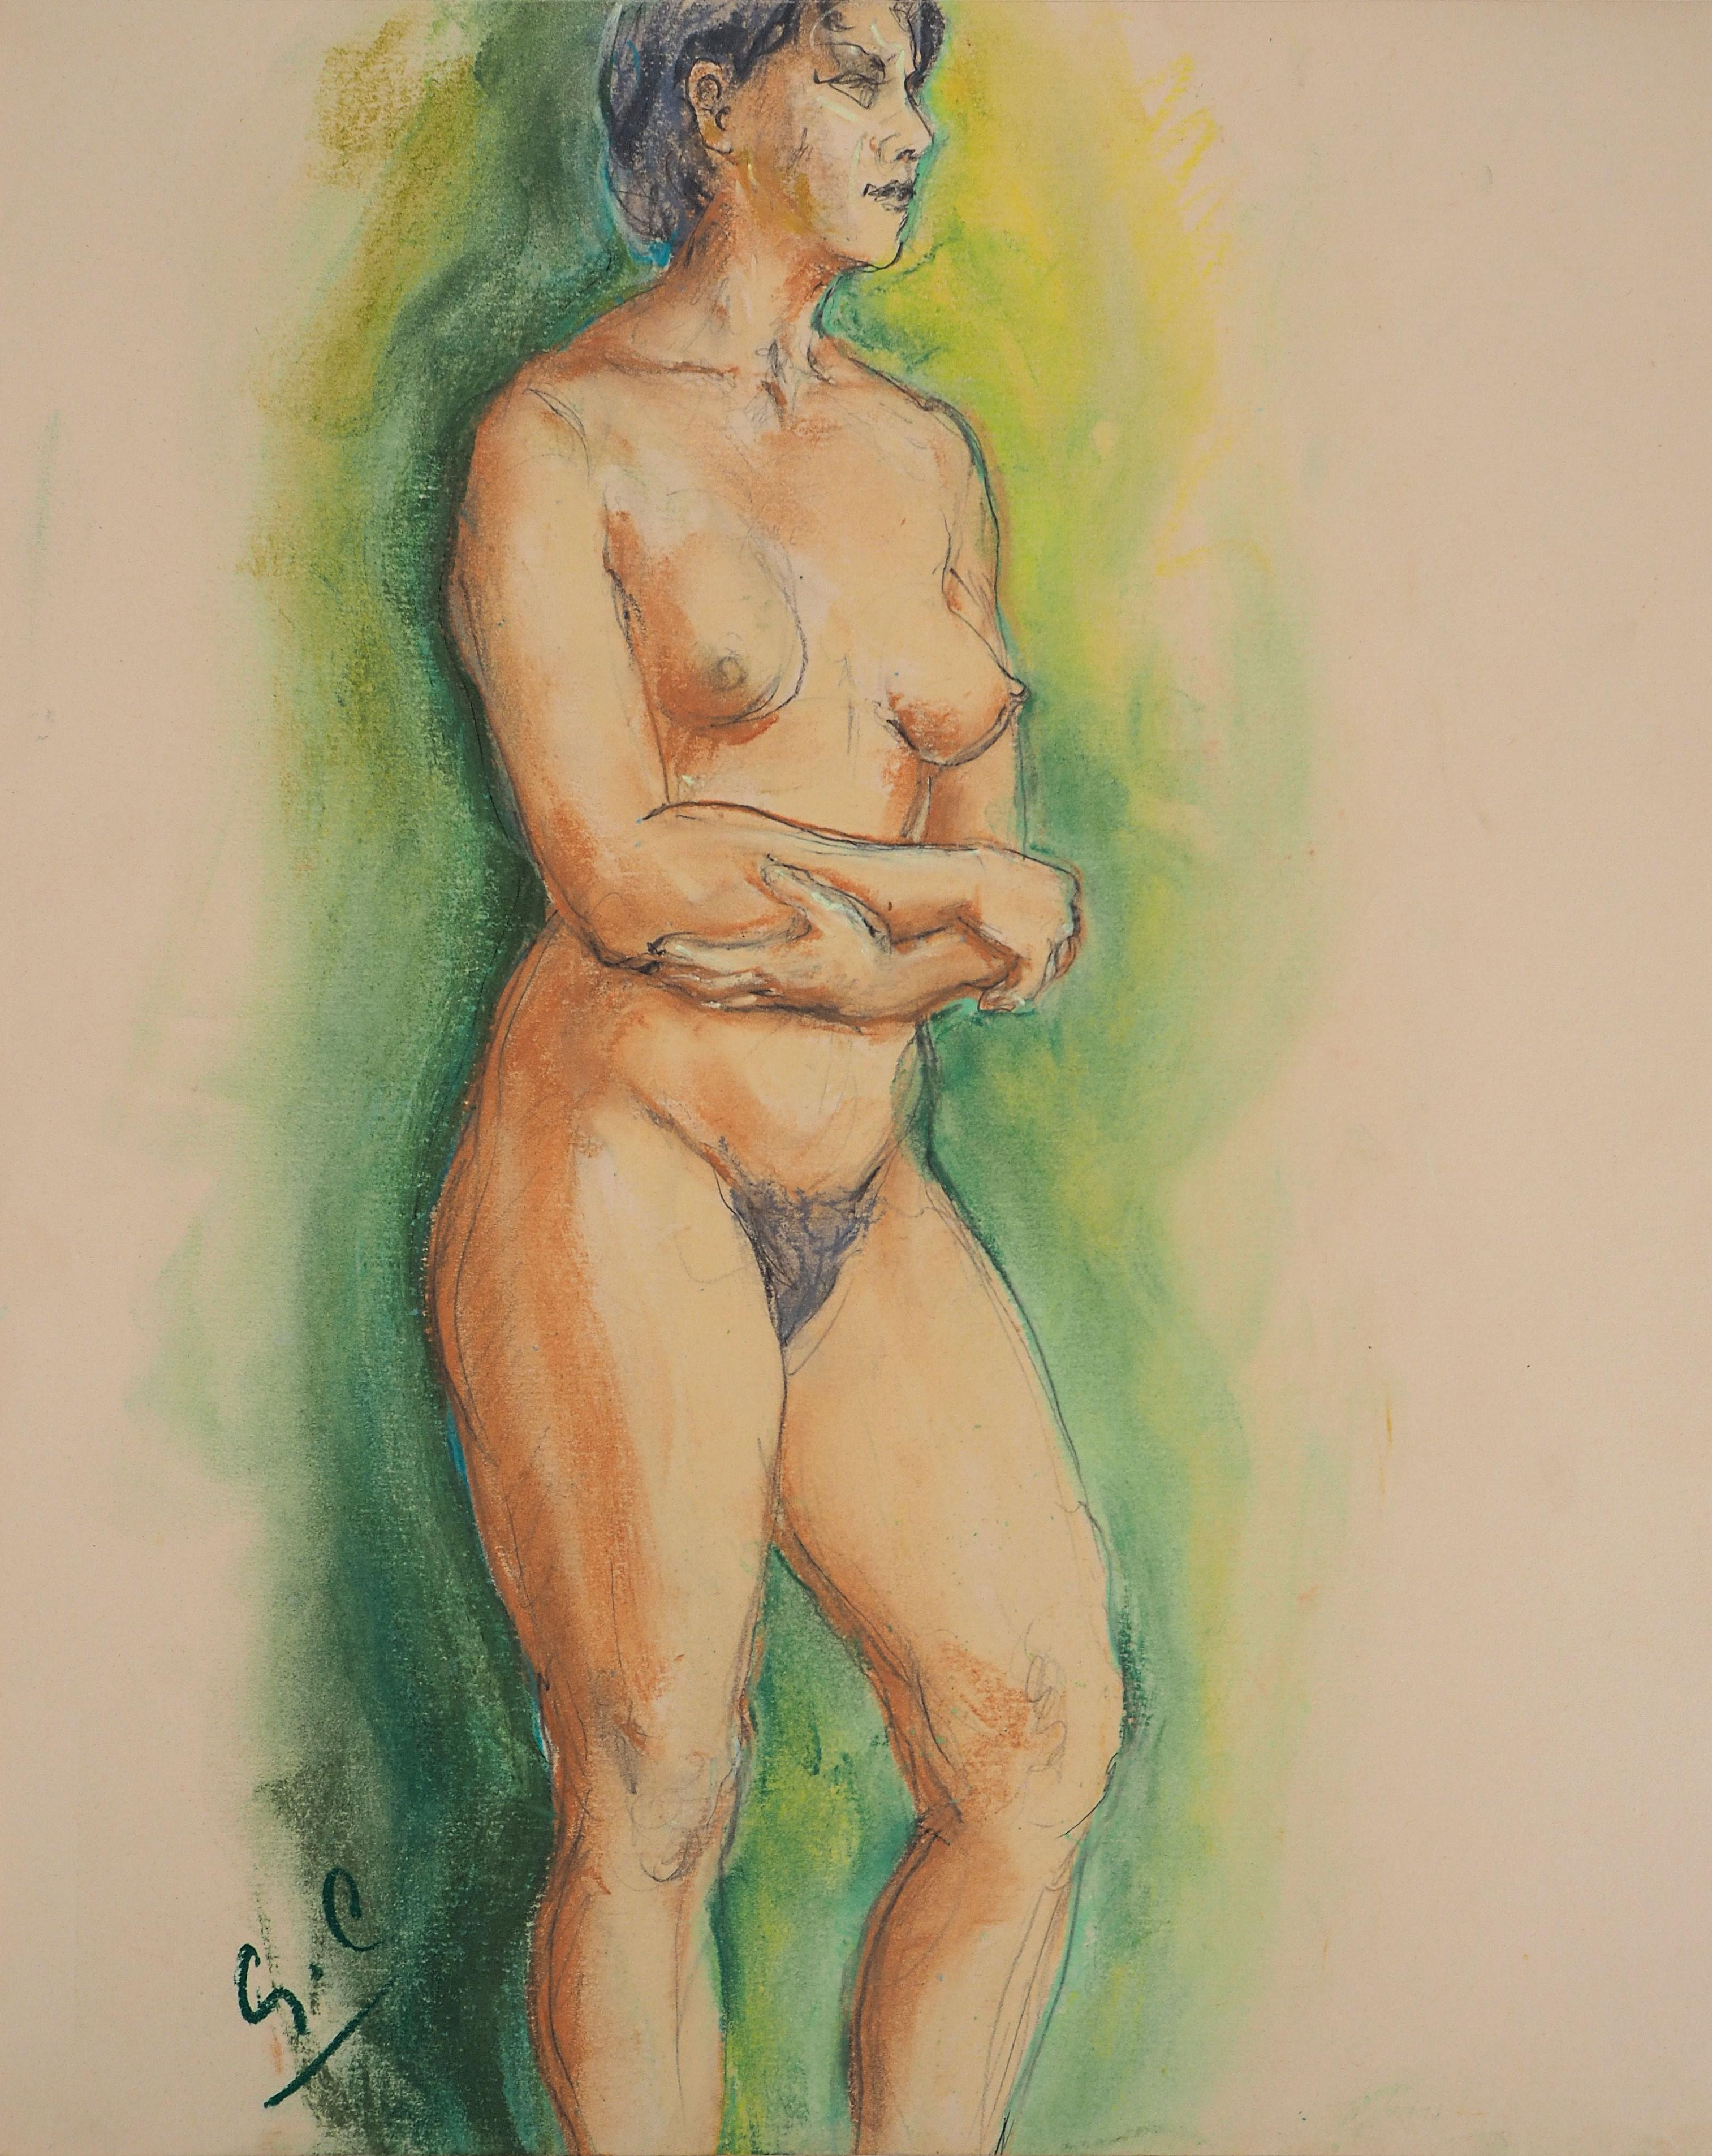 Dreaming Nude - Hand Signed Original Pastel Drawing - Art by Gaston Coppens